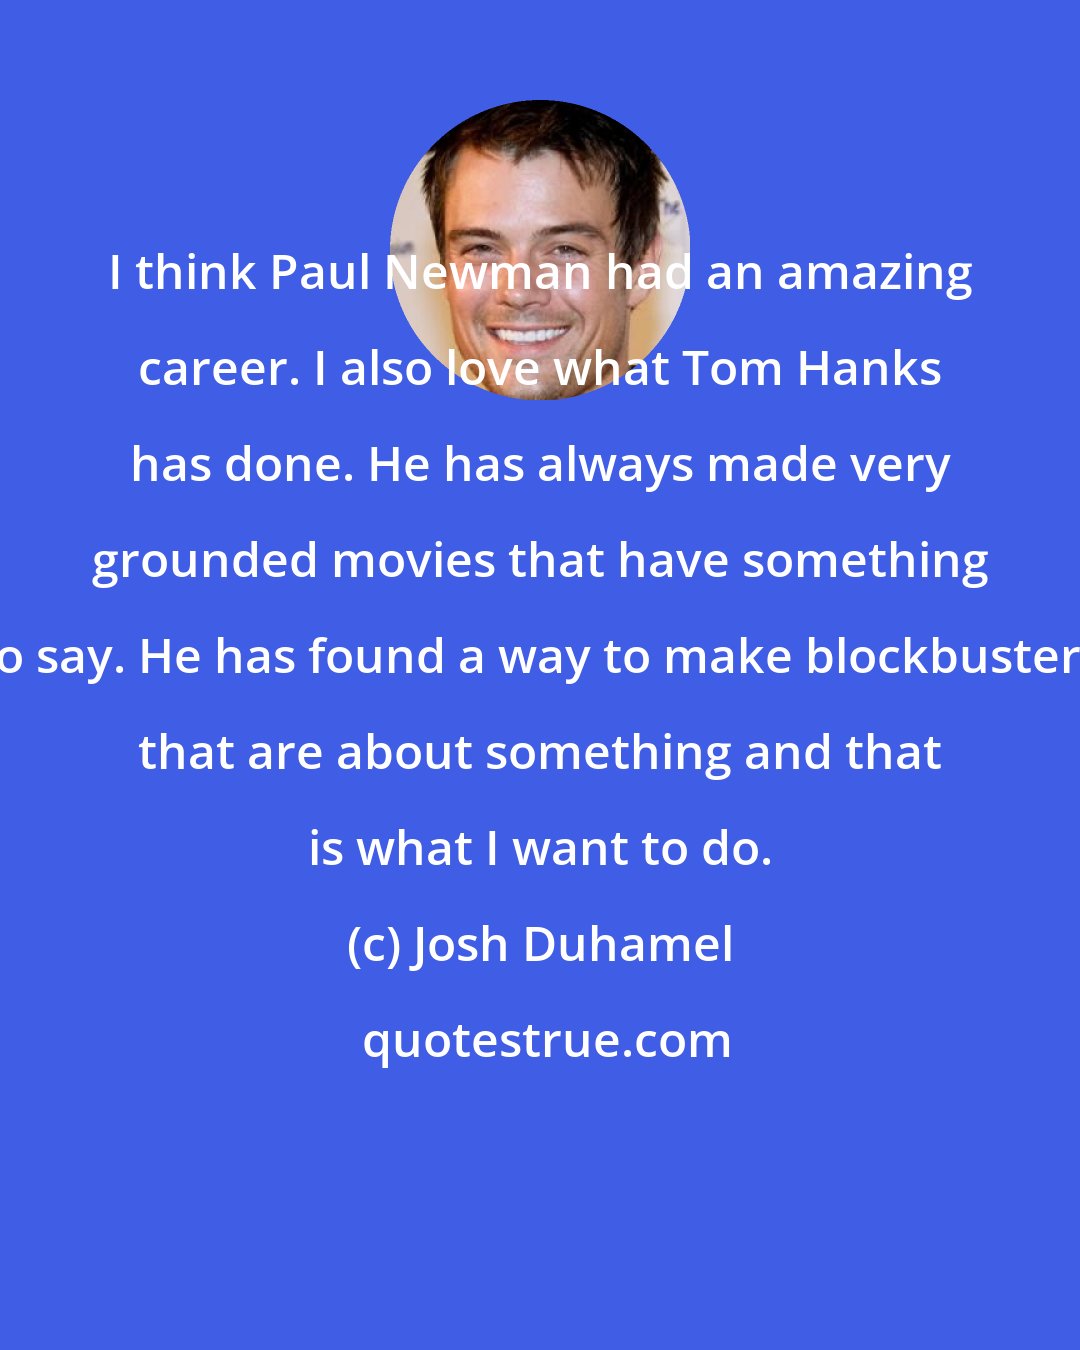 Josh Duhamel: I think Paul Newman had an amazing career. I also love what Tom Hanks has done. He has always made very grounded movies that have something to say. He has found a way to make blockbusters that are about something and that is what I want to do.